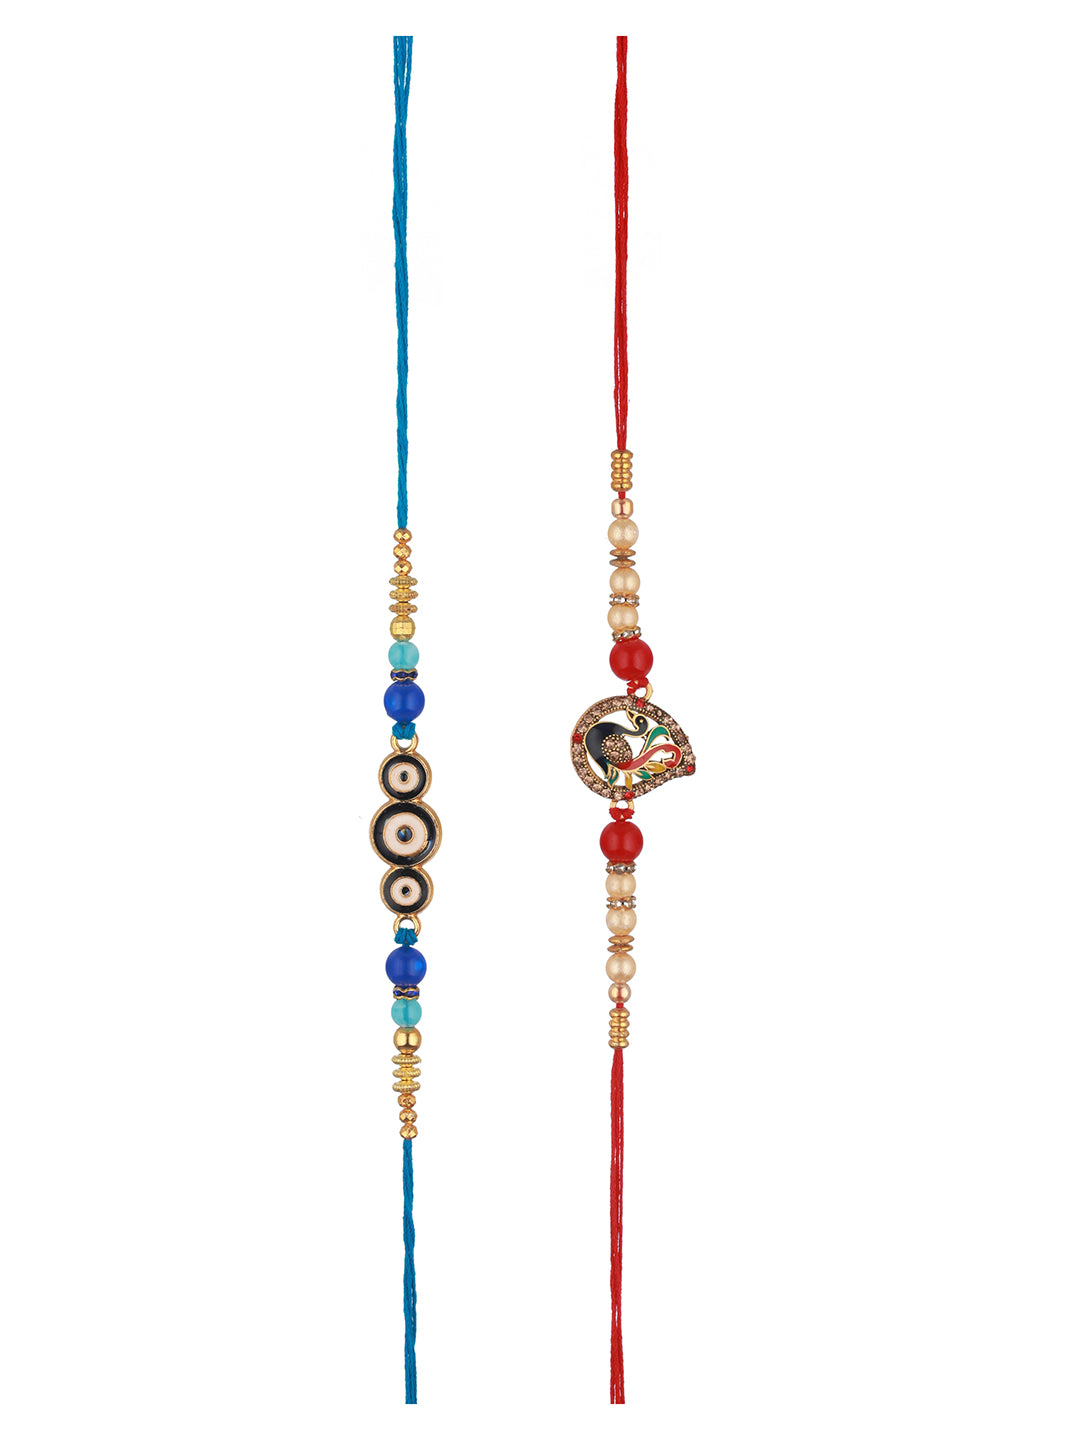 Set of 2 Evil Eye nd Peacock Rakhi with Roli Chawal with 10 gram Shri Laxmi round 999 Round Silver Coin